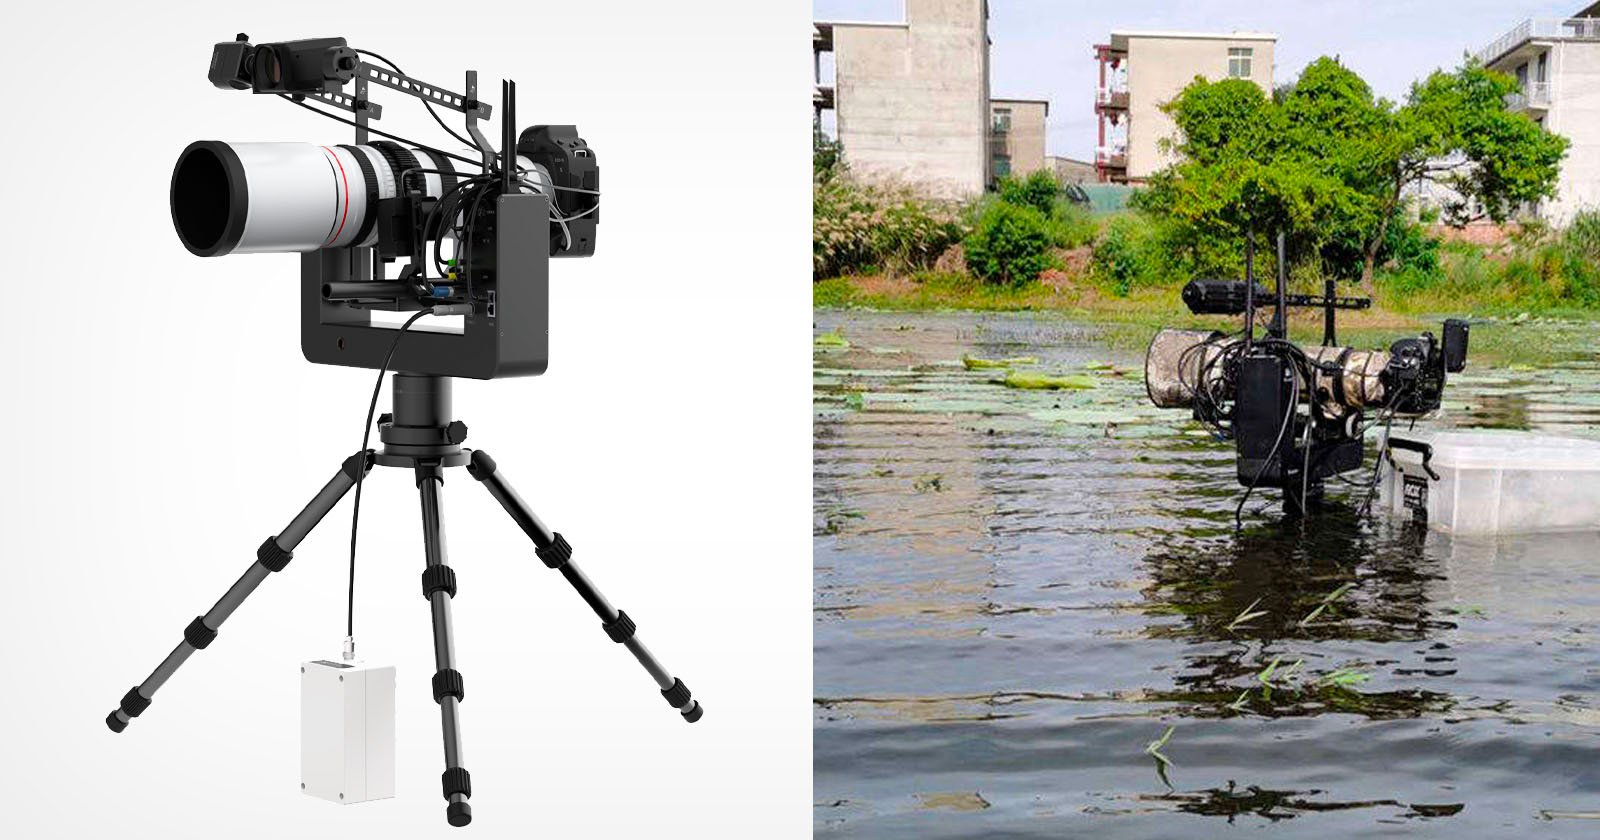  remote-controlled robot canon cameras lets shoot 